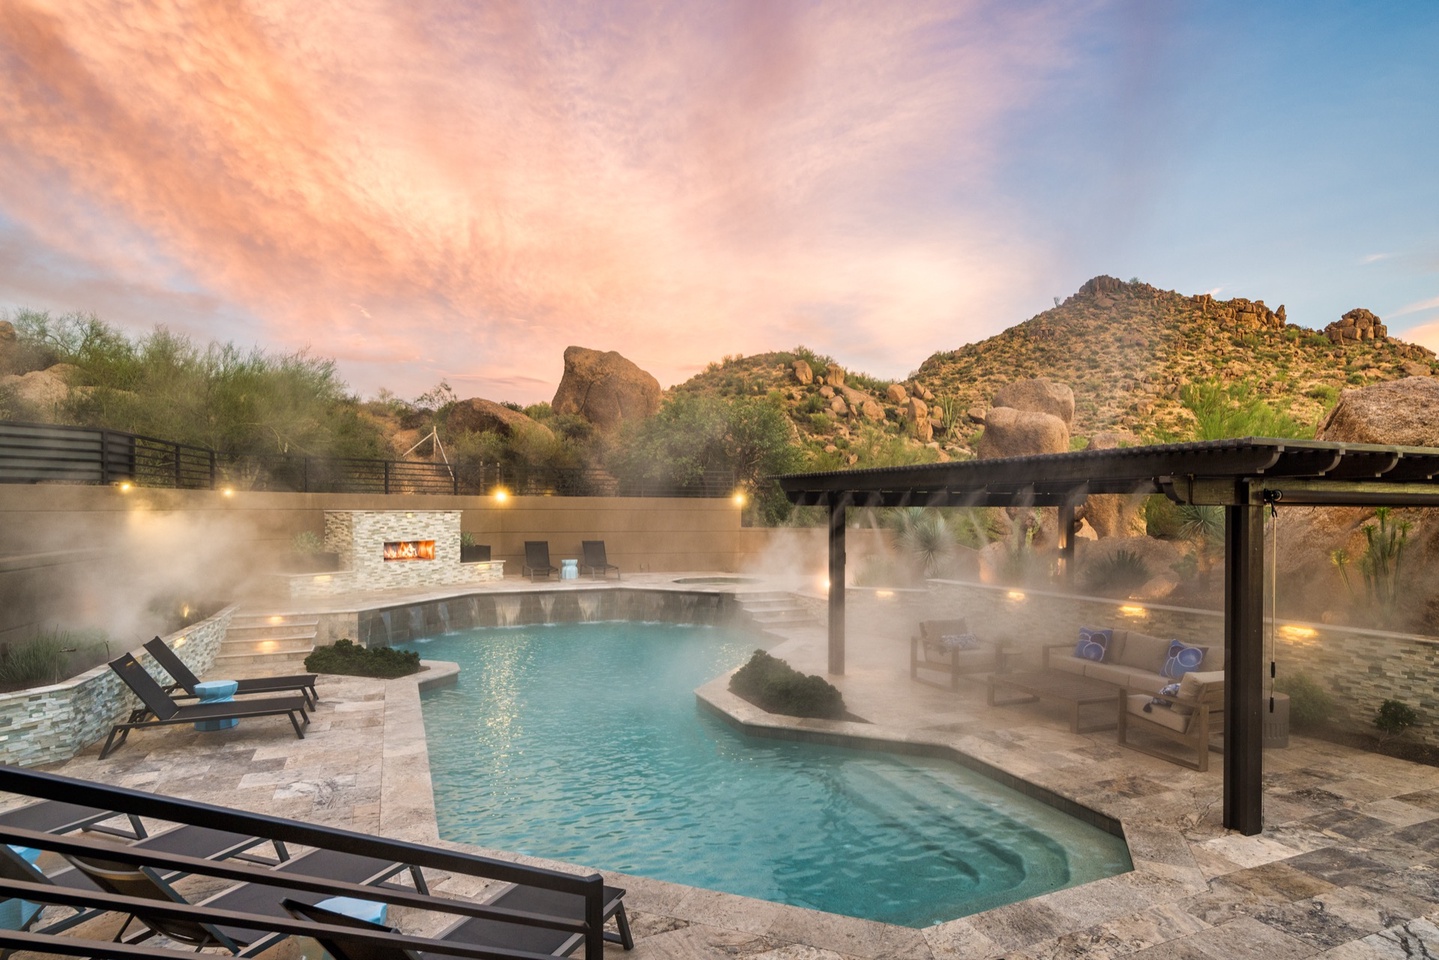 Take a dip in the heated* pool and spa